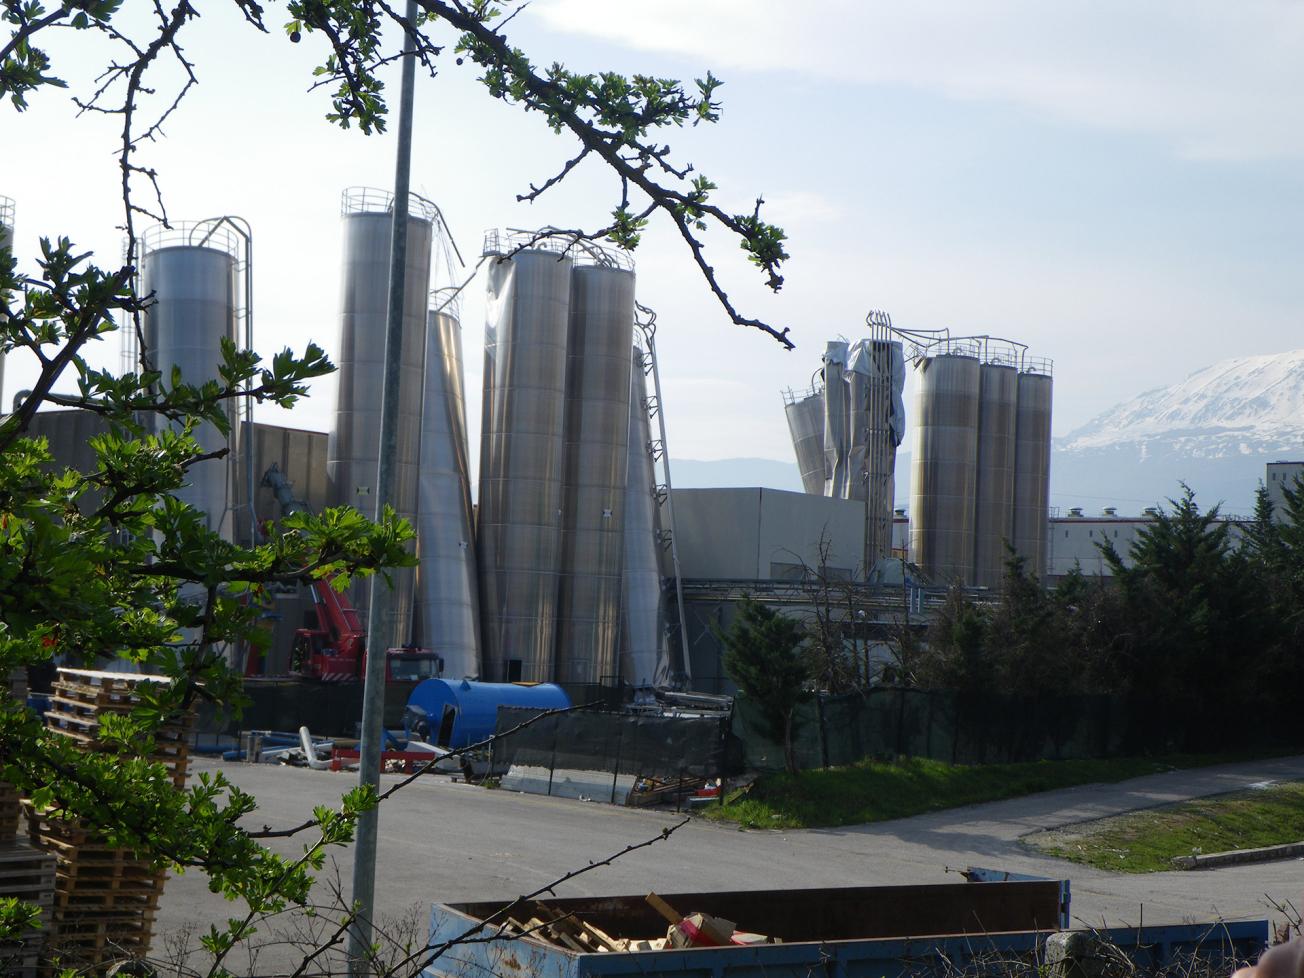 View of the buckling damage to silos in Bazzano